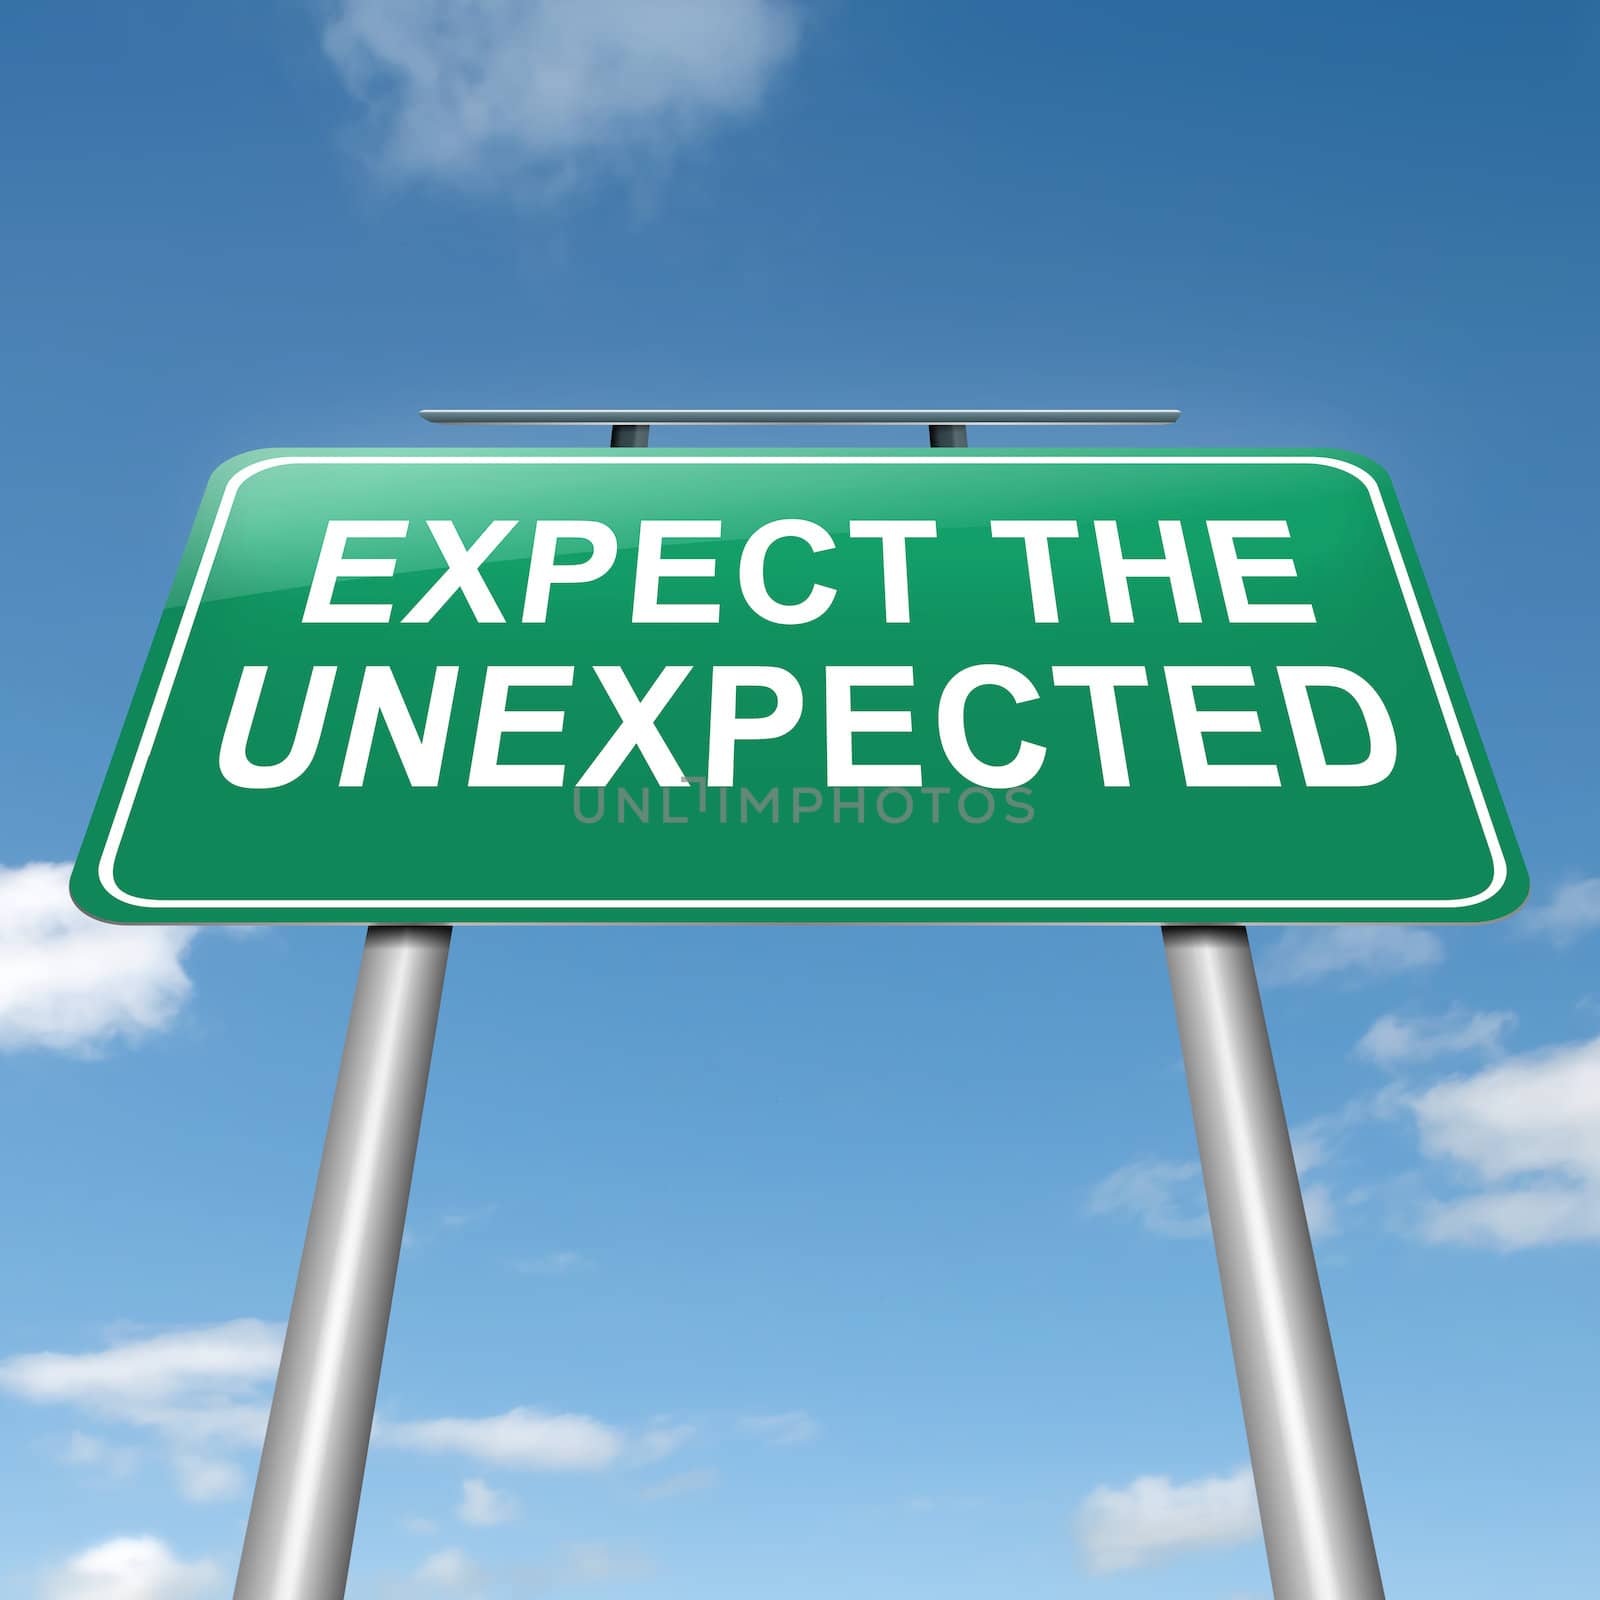 Illustration depicting a roadsign with an 'expect the unexpected' concept. Sky background.